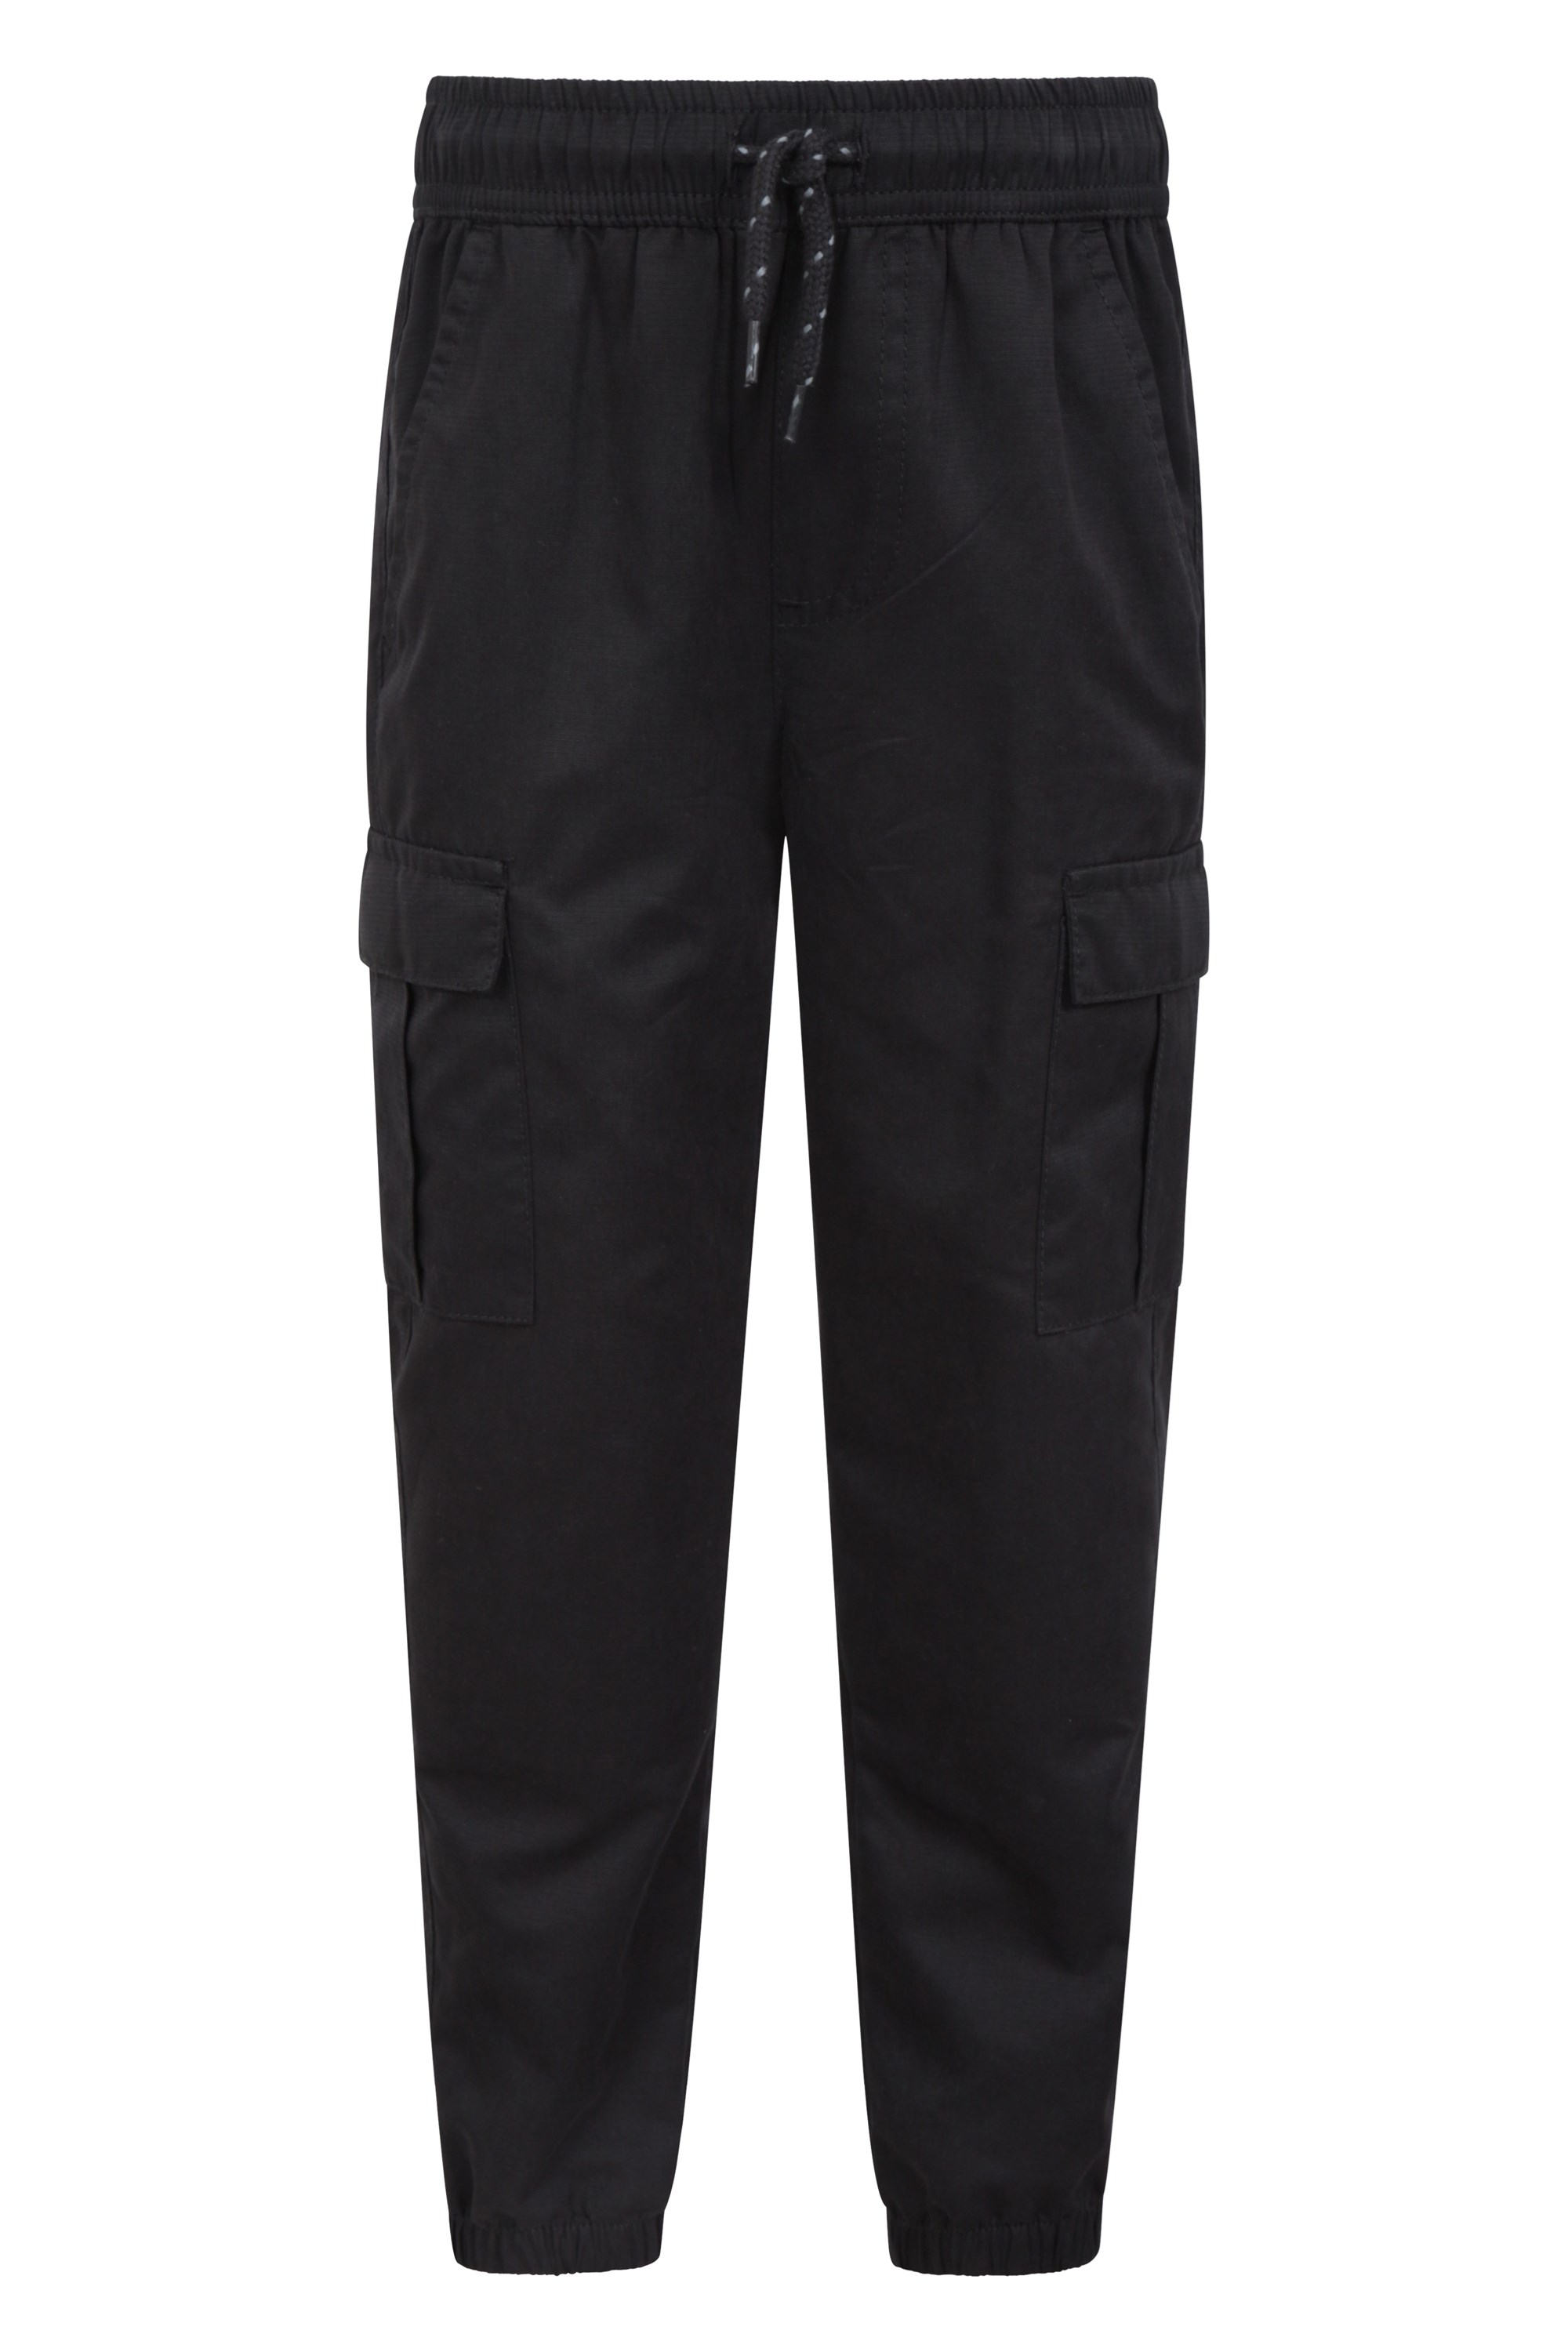 Kids Trousers with Reinforced Knees | Mountain Warehouse US